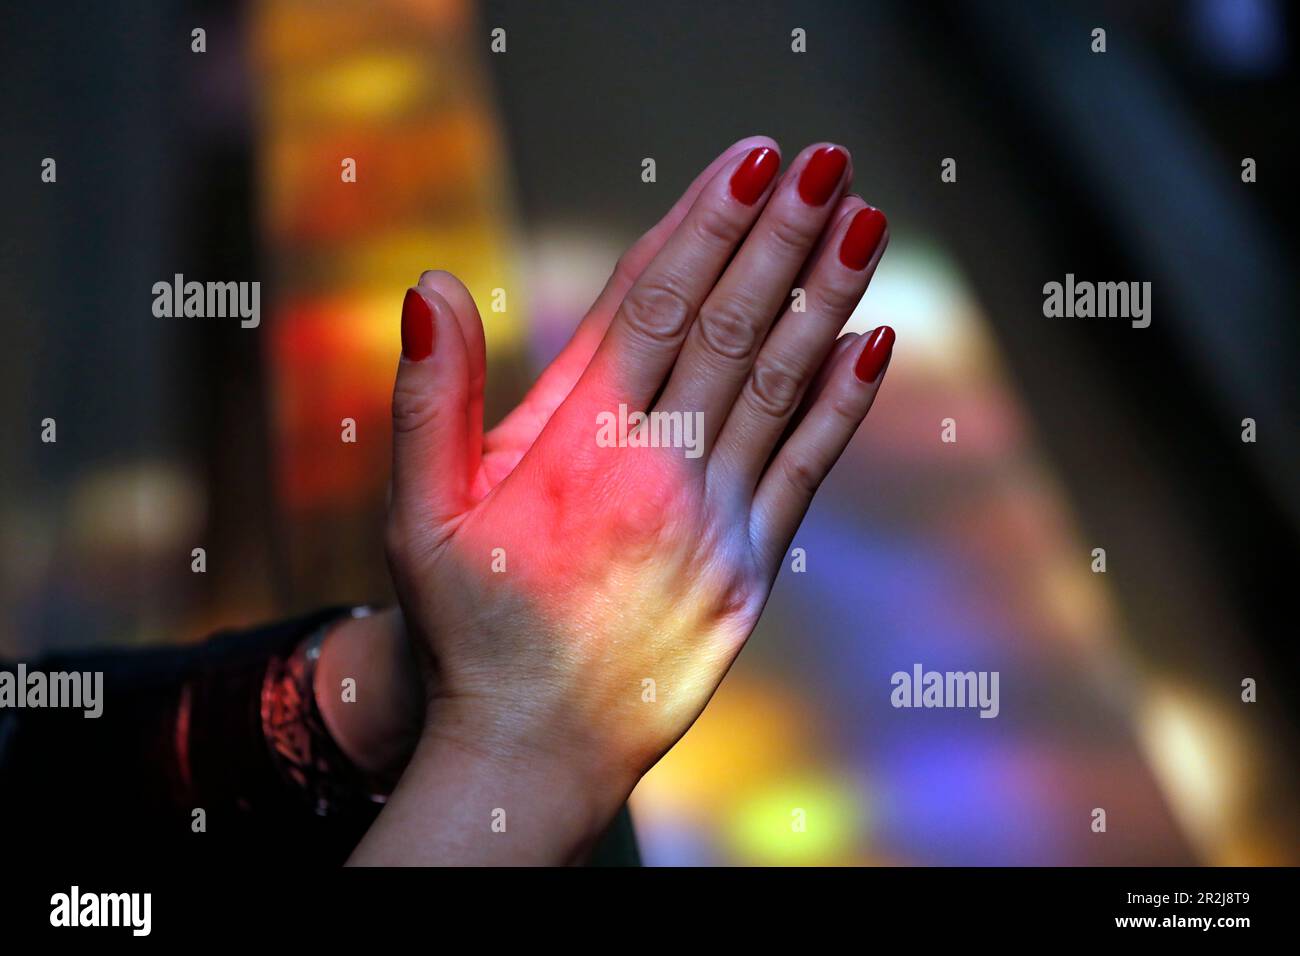 Close up of hands of woman praying in a church, Turckheim, France, Europe Stock Photo